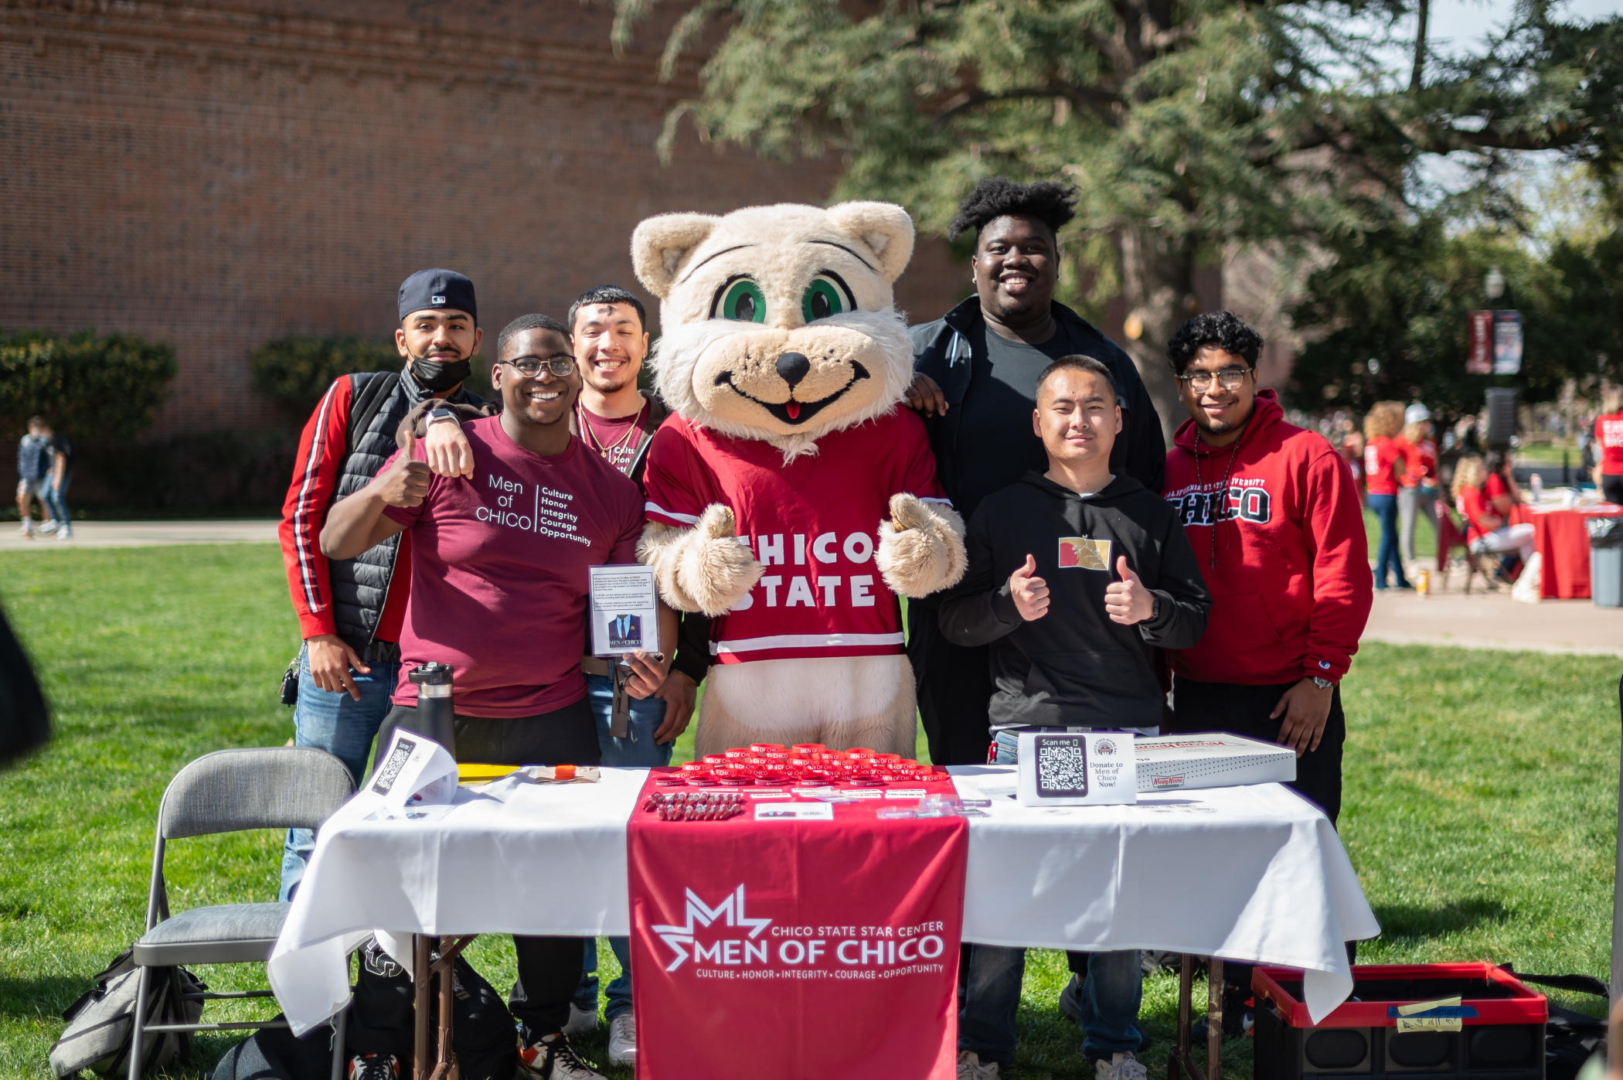 A group of students stands behind a table with a banner that reads "Men of Chico" while they pose for a photo with the Chico State mascot Willie the Wildcat.